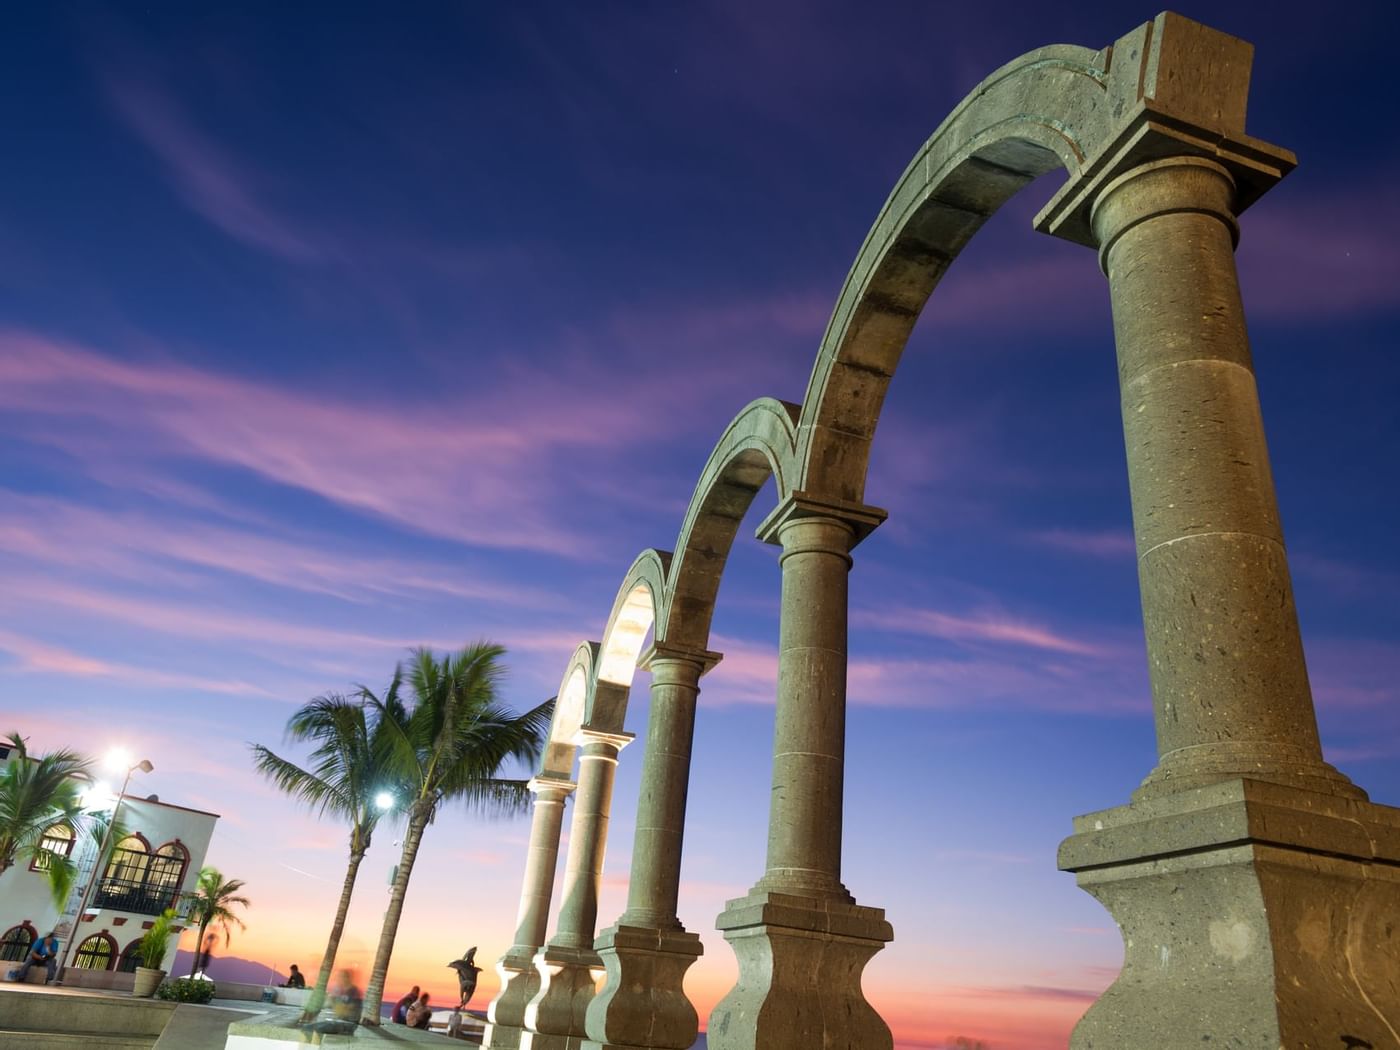 Arches of El Malecón at sunset near Fiesta Americana Hotels